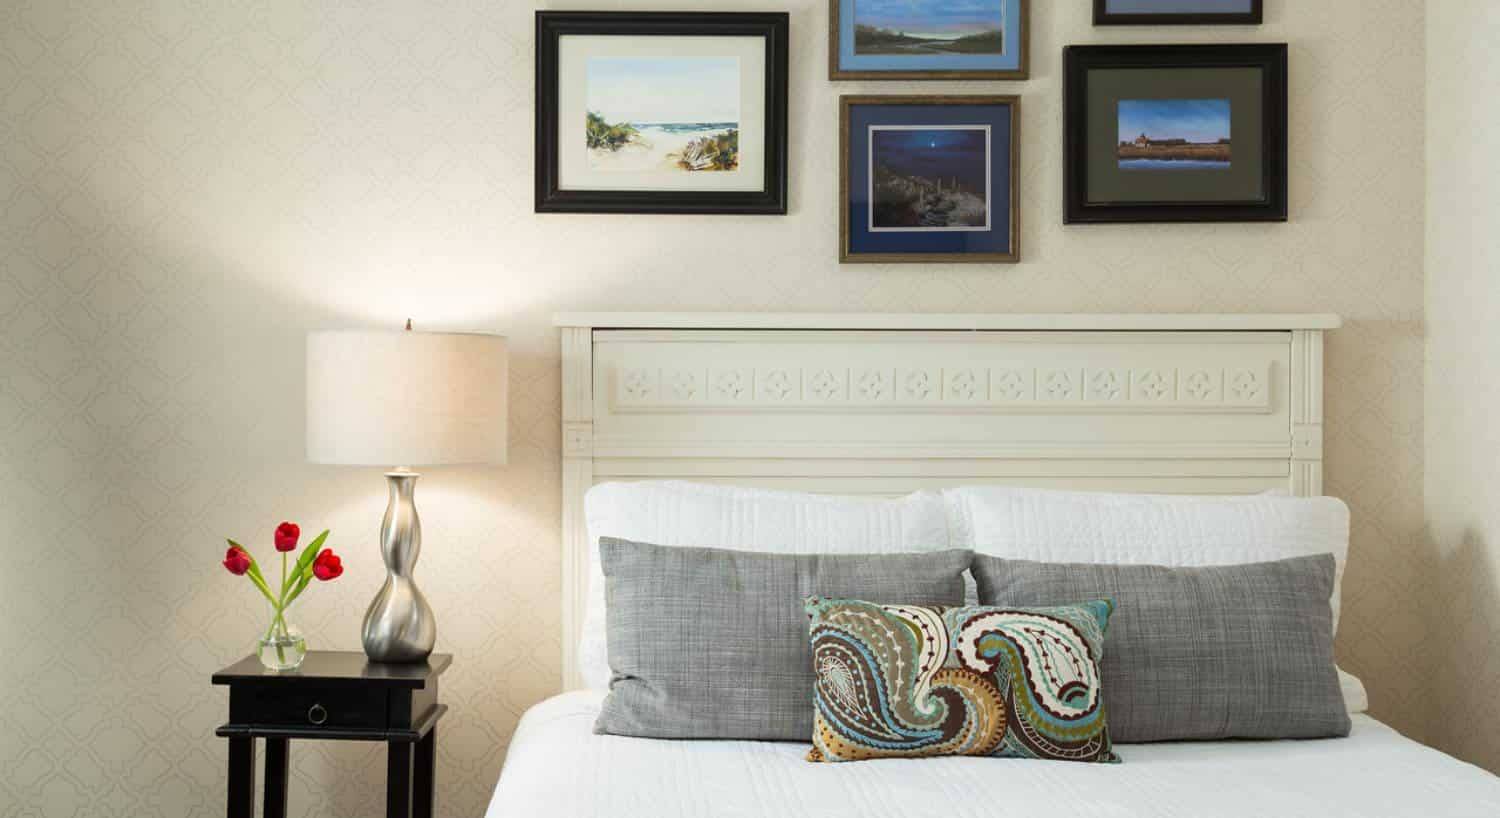 Bed with antiqued headboard, white bedding, gray pillows, light brocade wallpaper, and pictures hanging on the wall